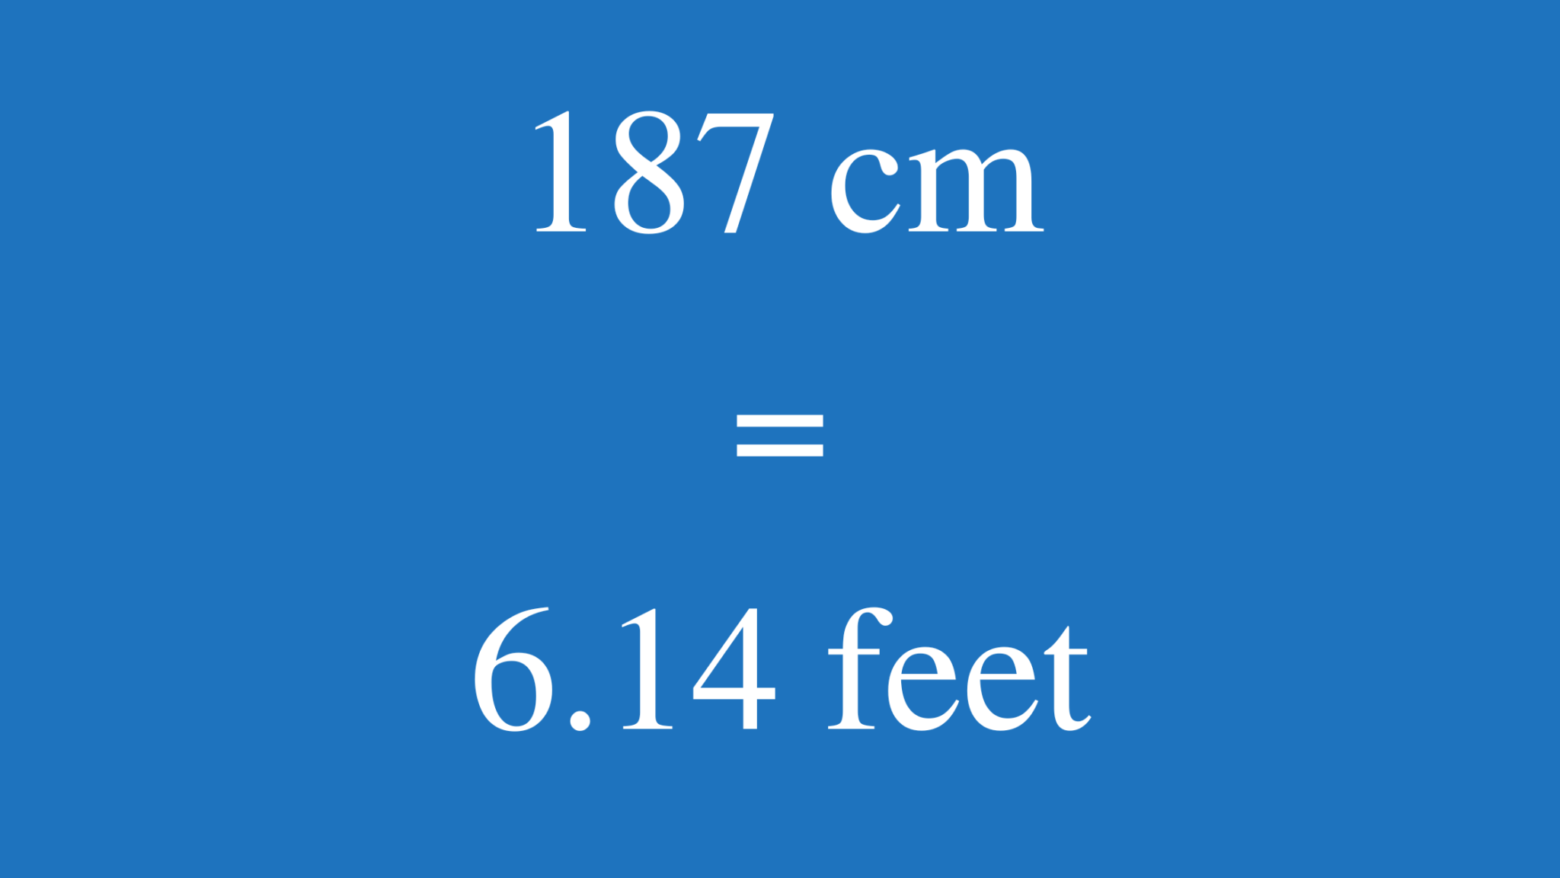 Convert 187 cm in feet and inches